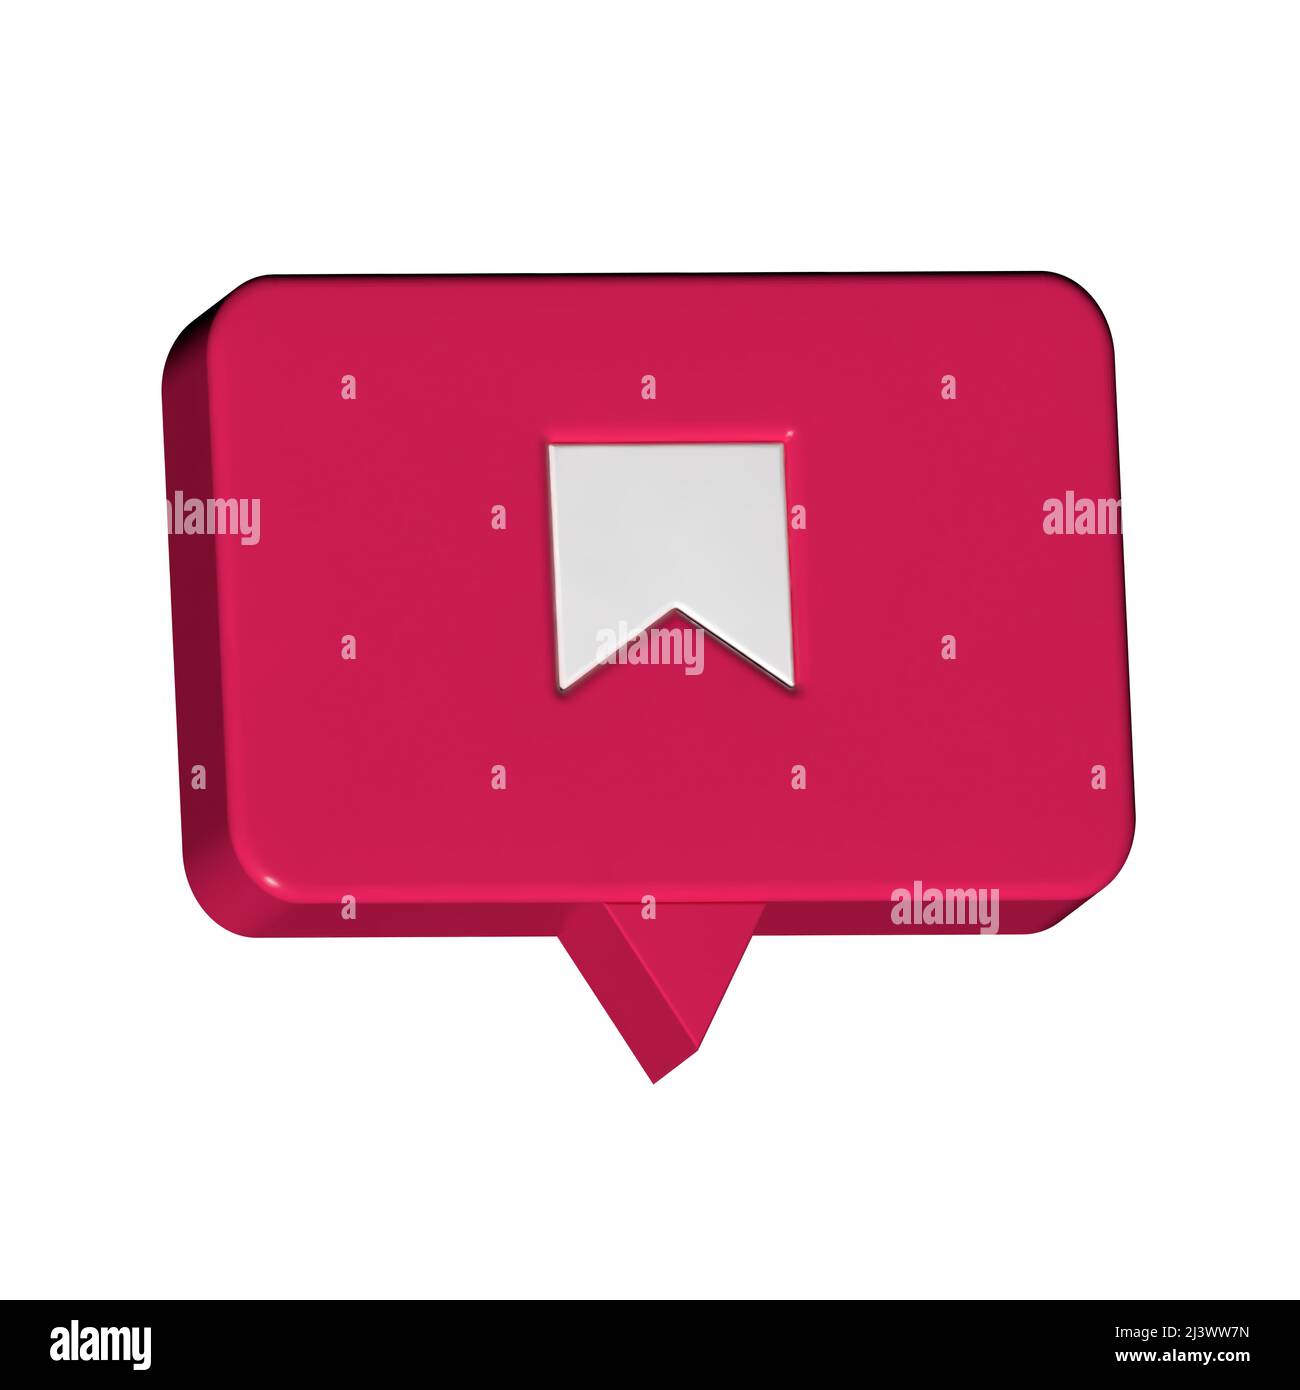 Social media notification icon. Save icon on a red background. 3d design. Stock Photo